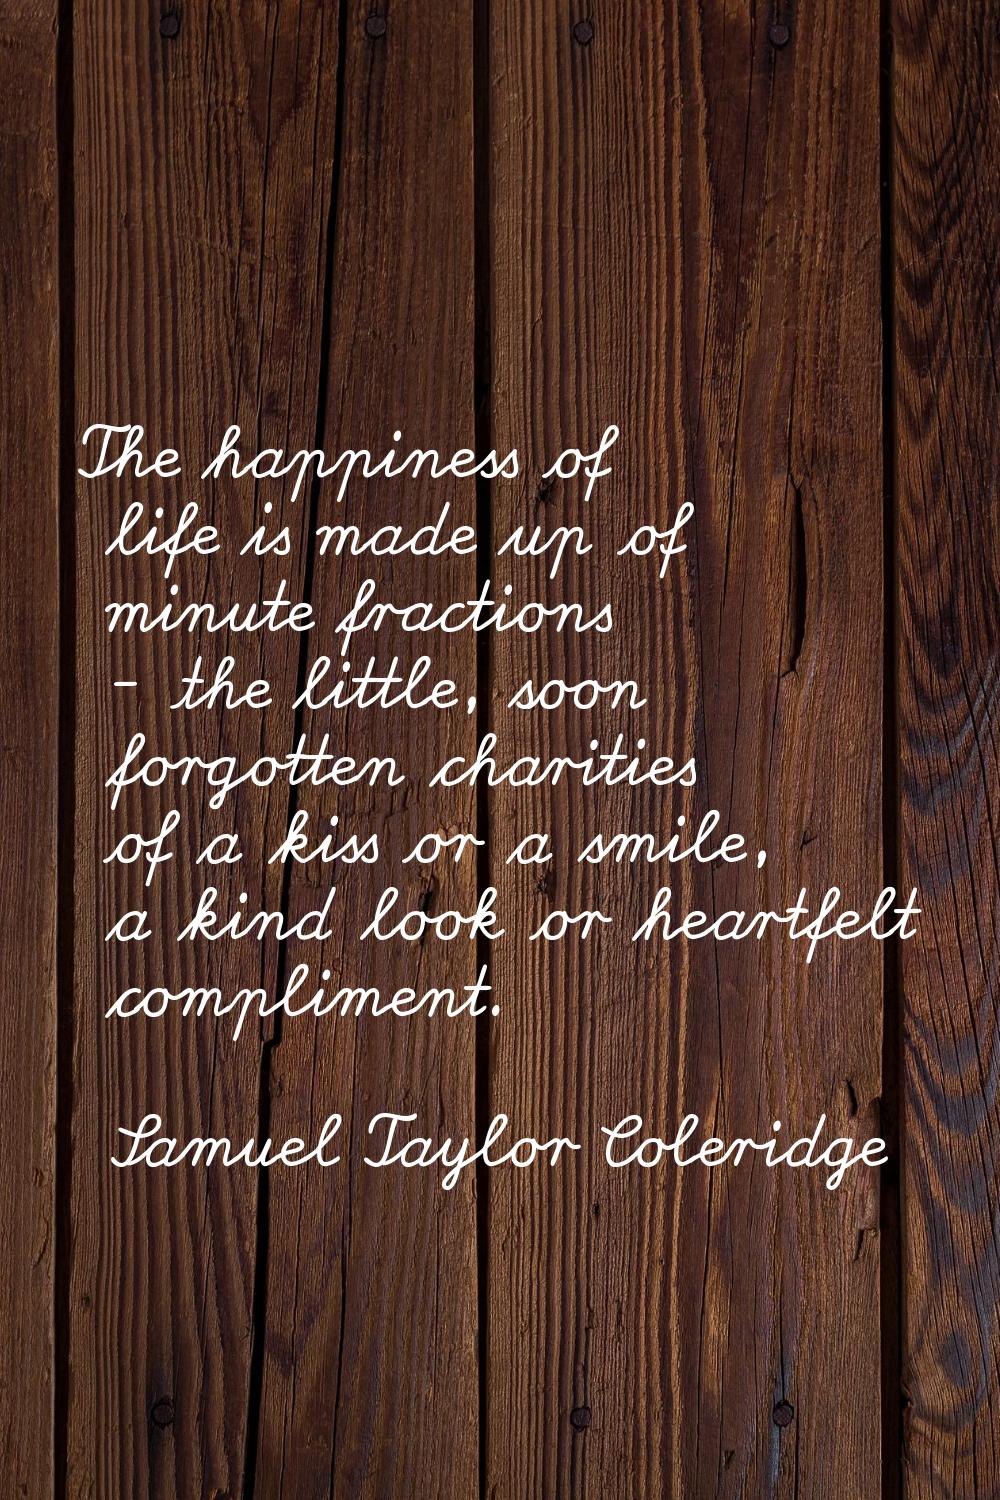 The happiness of life is made up of minute fractions - the little, soon forgotten charities of a ki